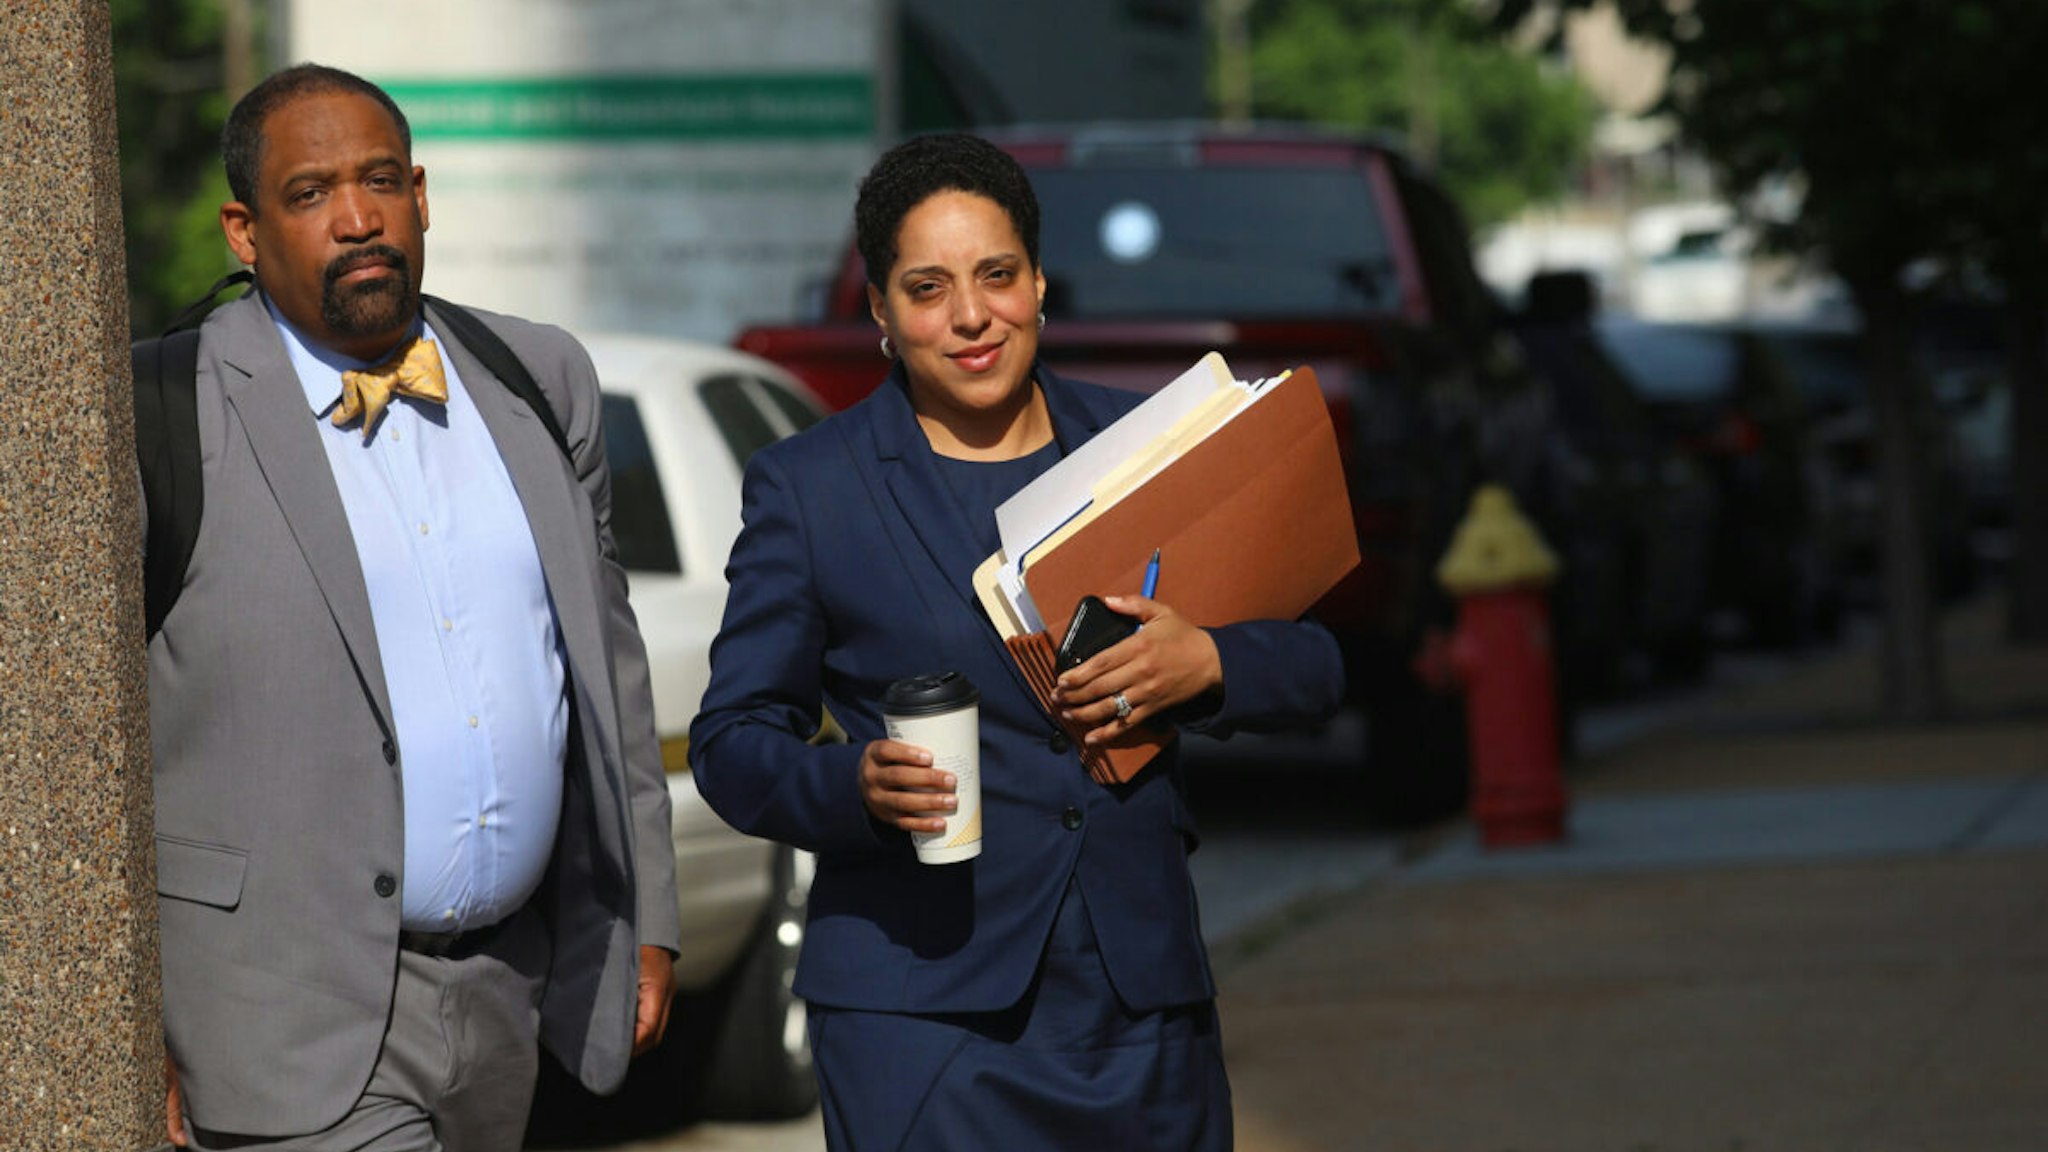 St. Louis Circuit Attorney Kim Gardner, right, and Ronald Sullivan, a Harvard law professor, arrive at the Civil Courts building on May 14, 2018.